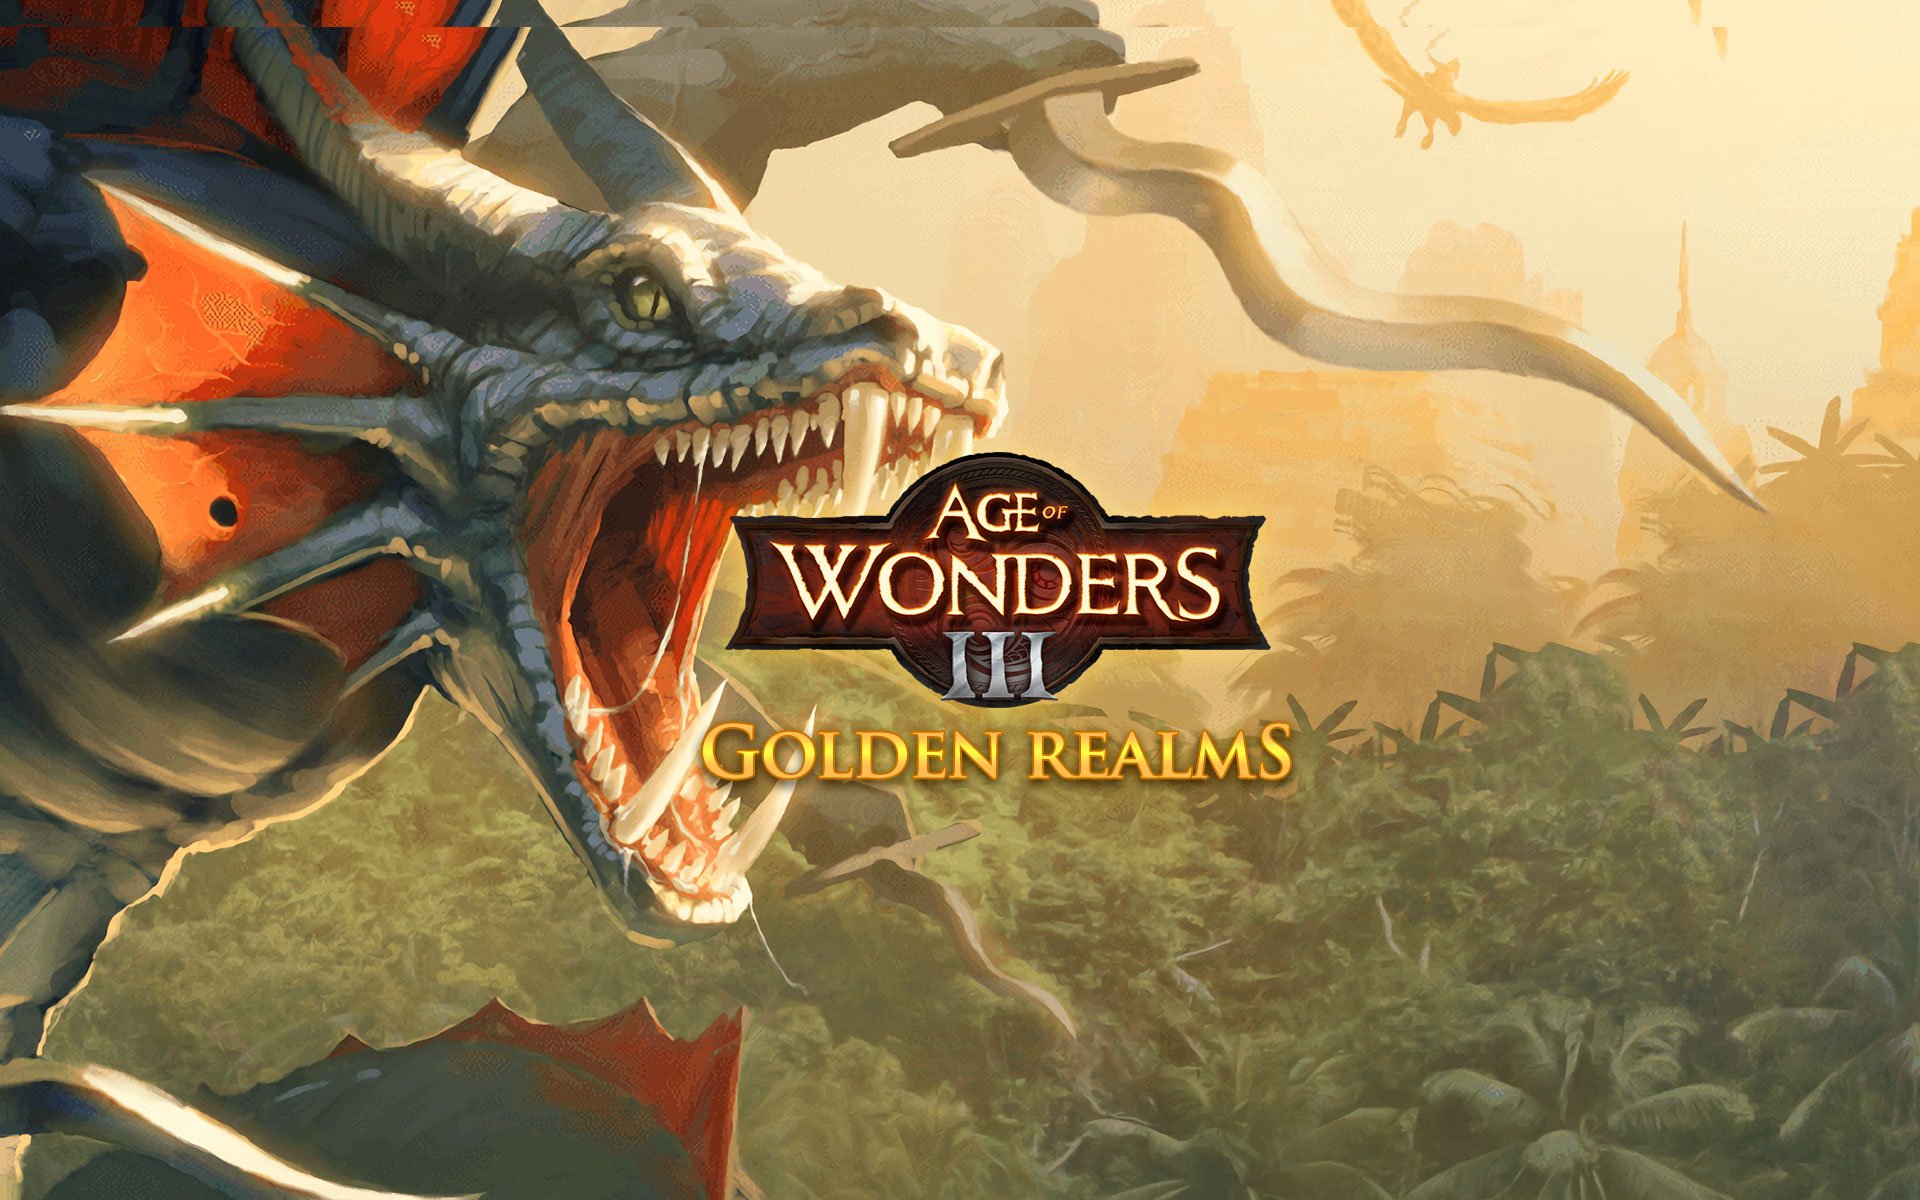 Age of Wonders III - Golden Realms Expansion por R$ 23.99